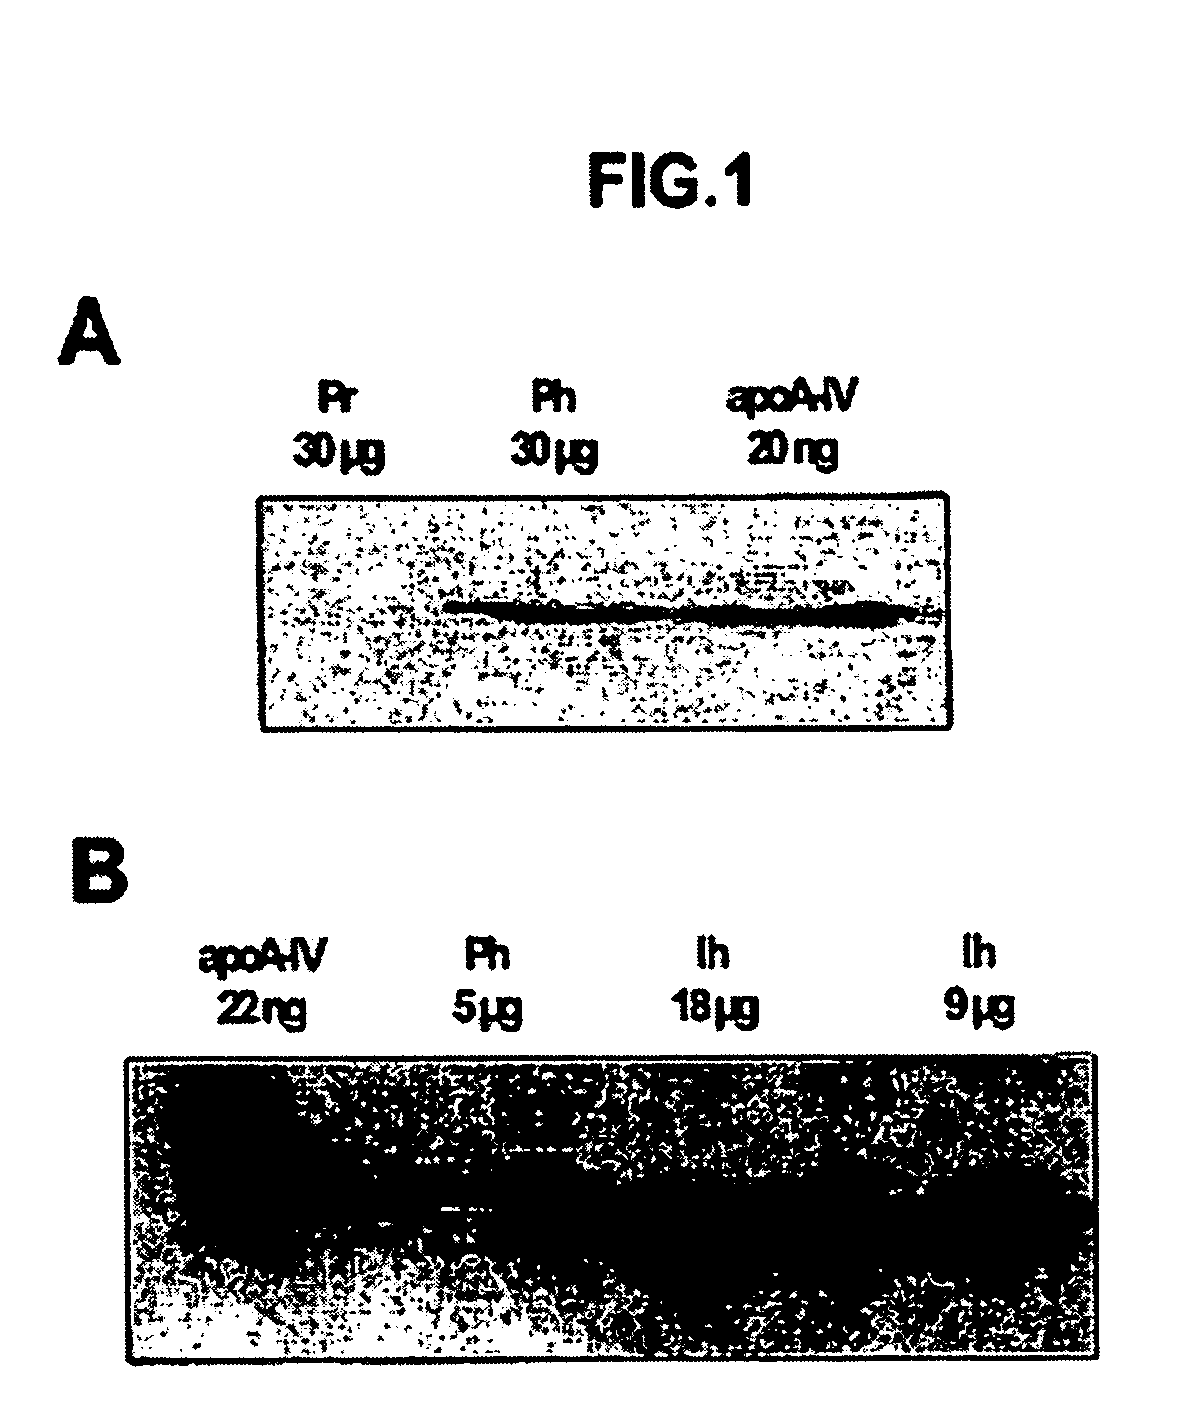 Method of diagnosing changes in the intestinal absorptive surface in an individual